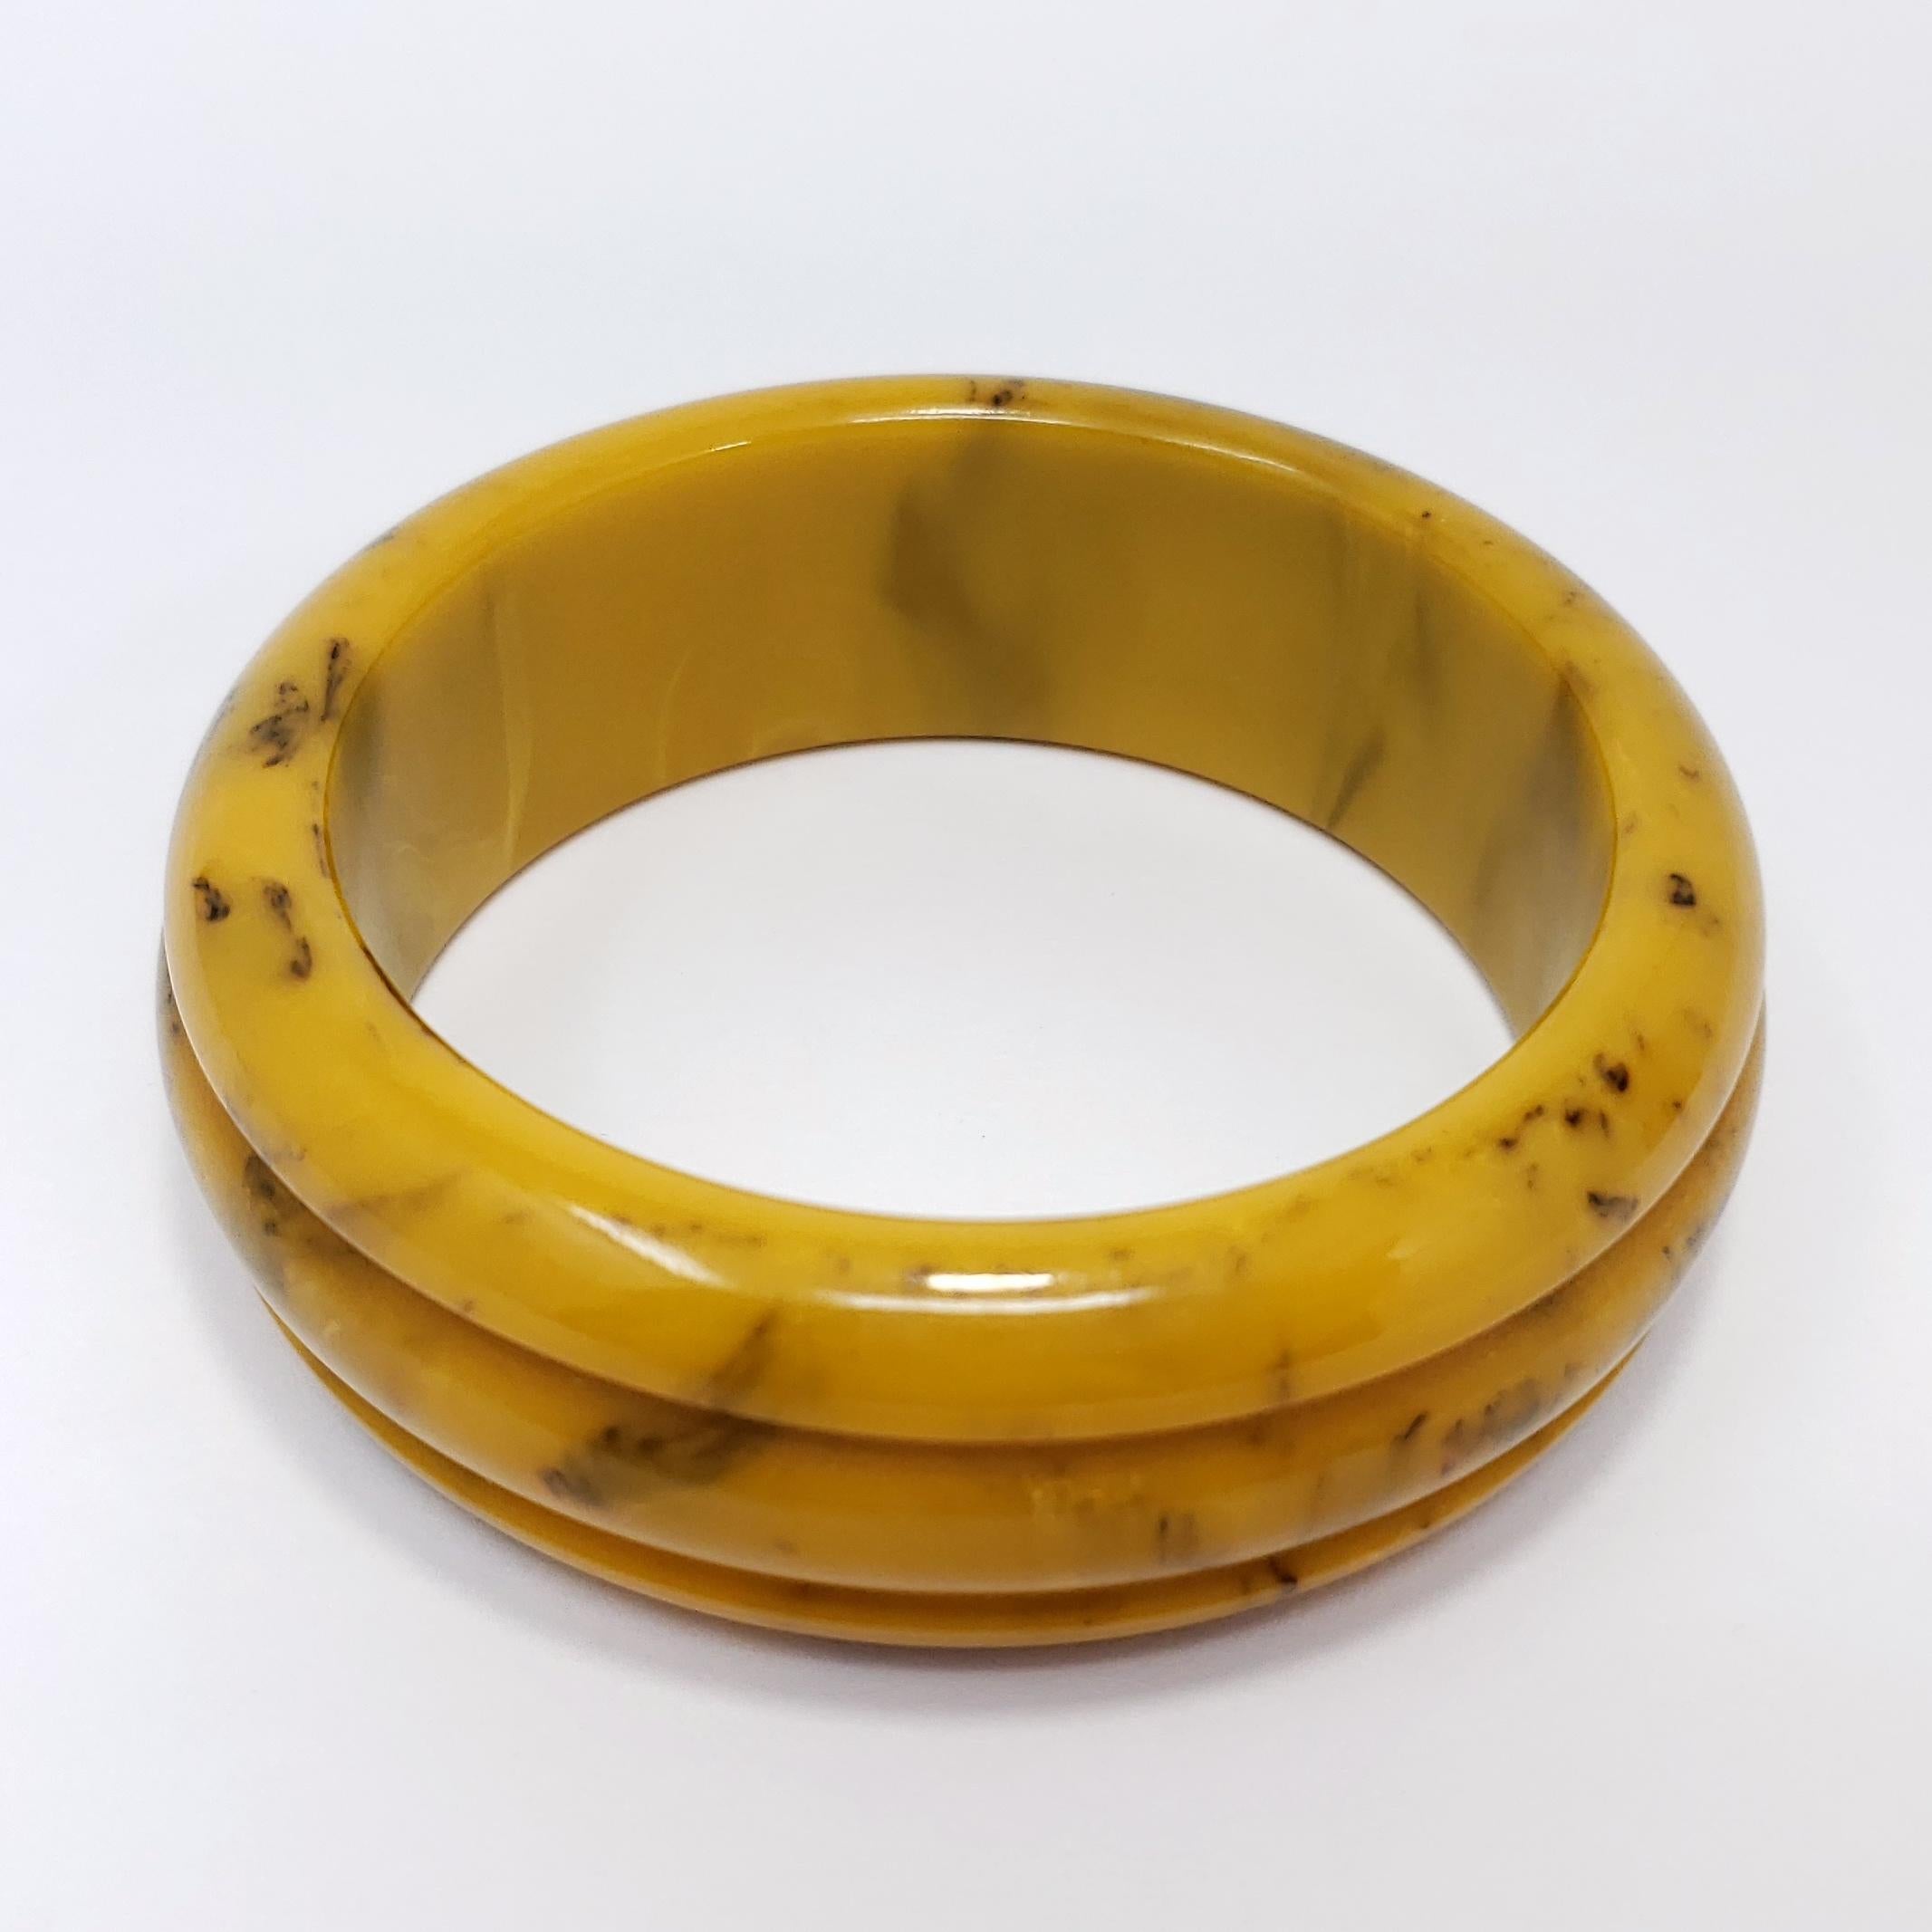 A chunky vintage bakelite bracelet! Carved bangle design in marbled butterscotch yellow colors. 

Height: 2.5 cm
Inner diameter: 6.4 cm
